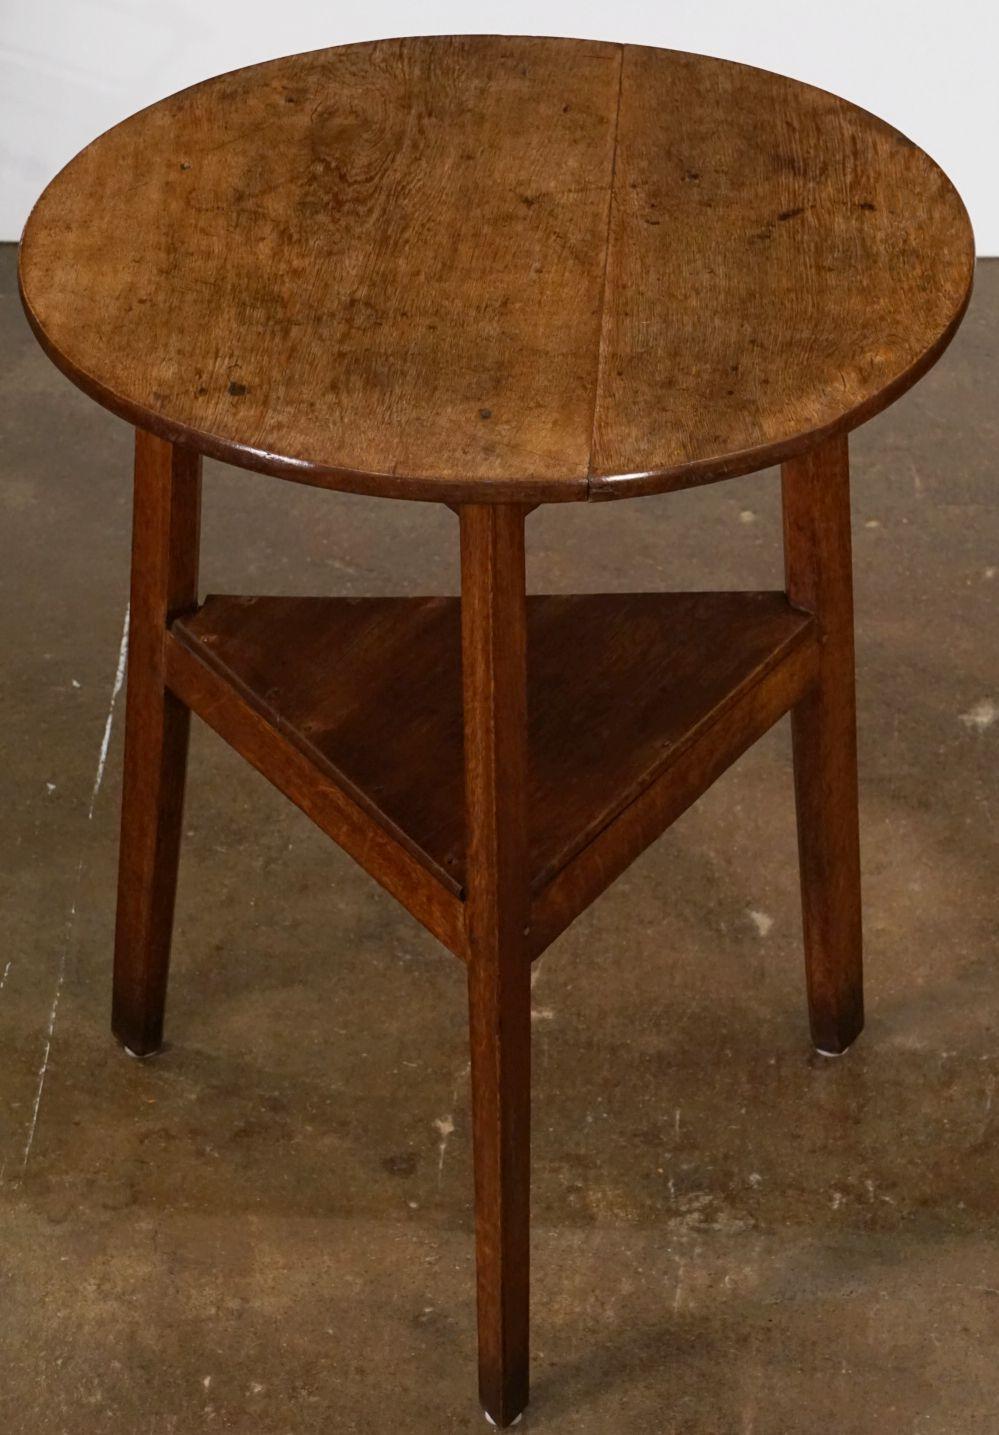 A fine English cricket table of oak featuring the traditional round or circular top over a tripod base with triangular under-tier shelf.

Makes a nice occasional table or side table.

Dimensions are height 32 inches x diameter 28 1/8 inches.